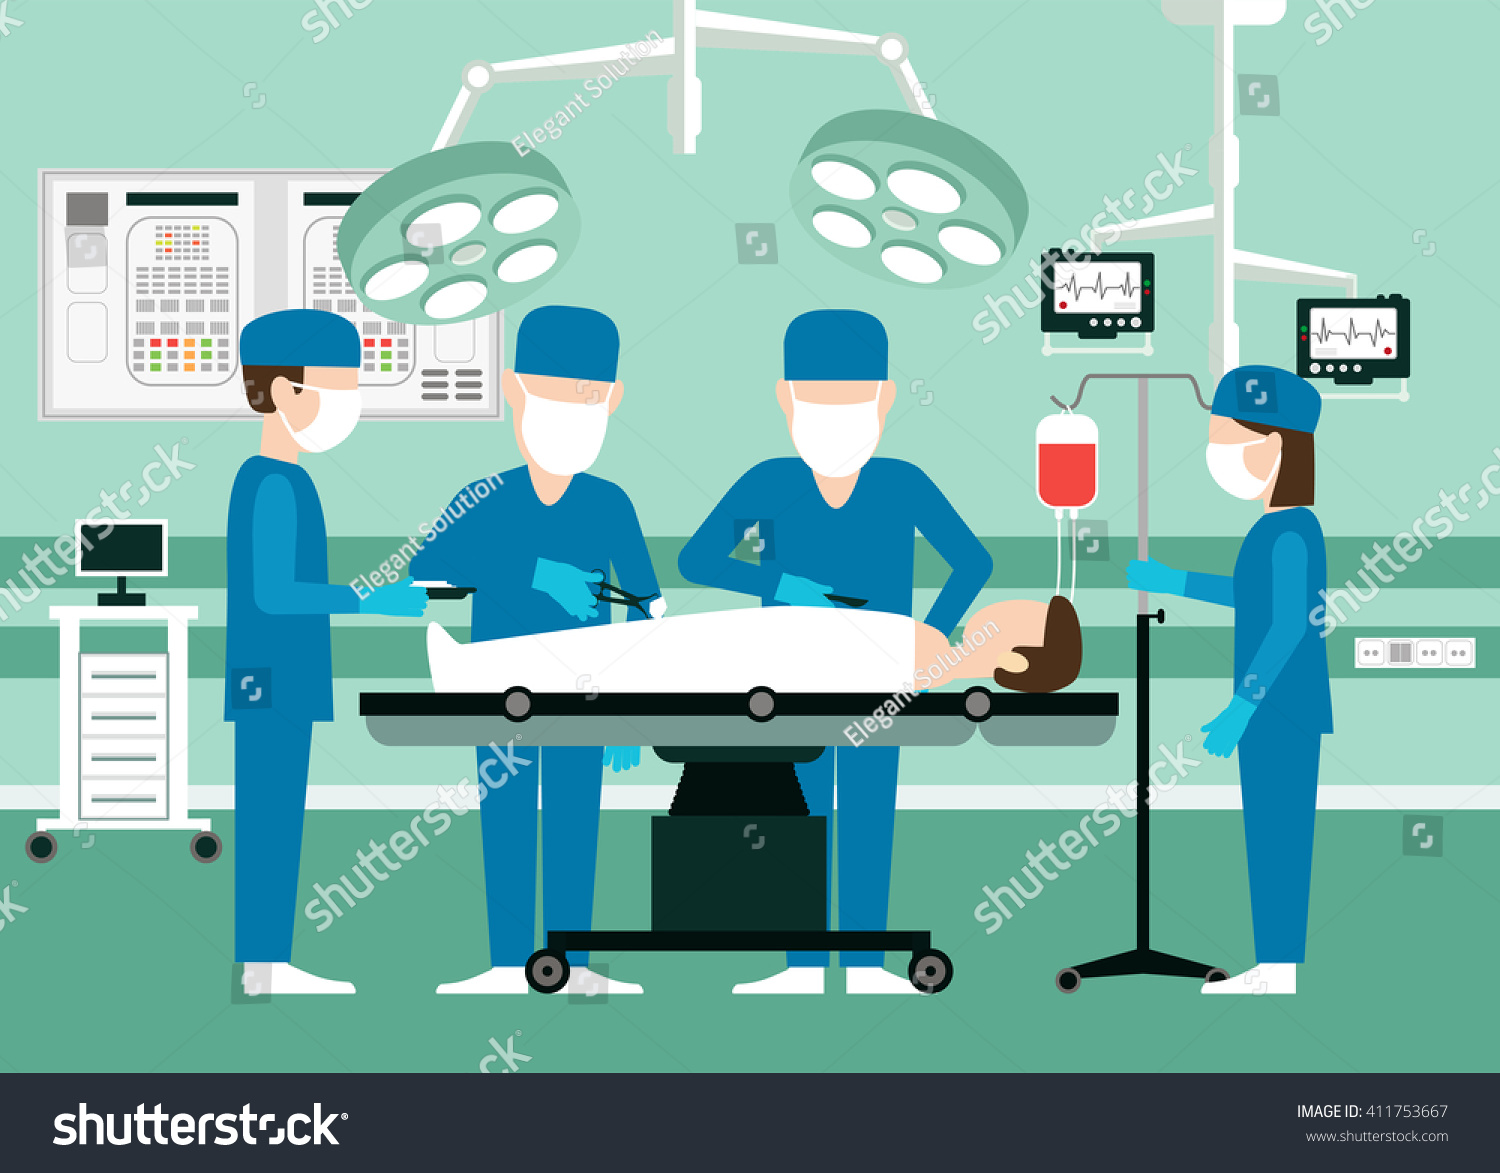 operating room clipart free - photo #20